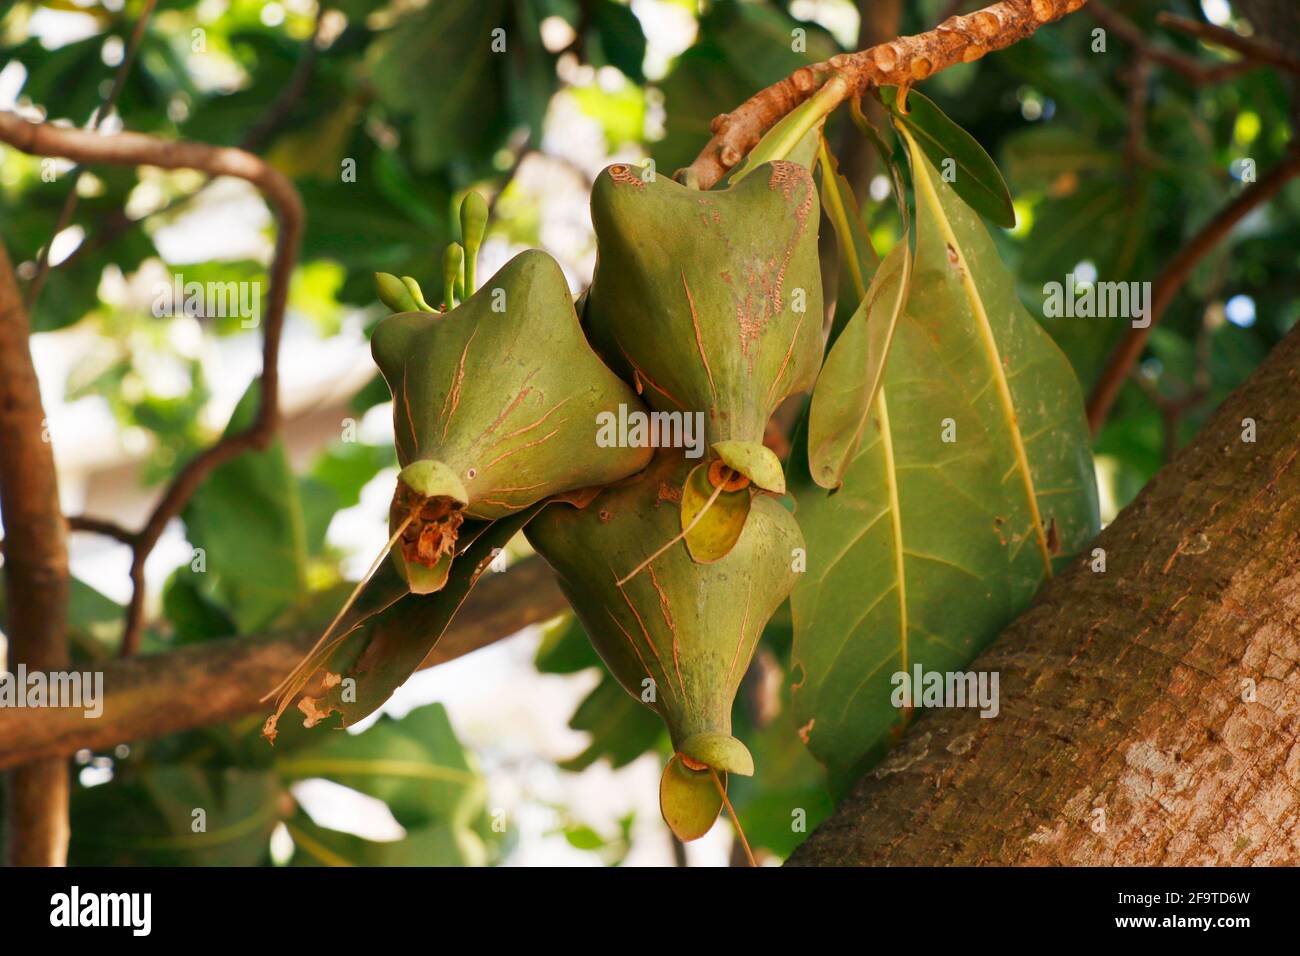 tropical fruit hanged on a branch similar to almond family Stock Photo